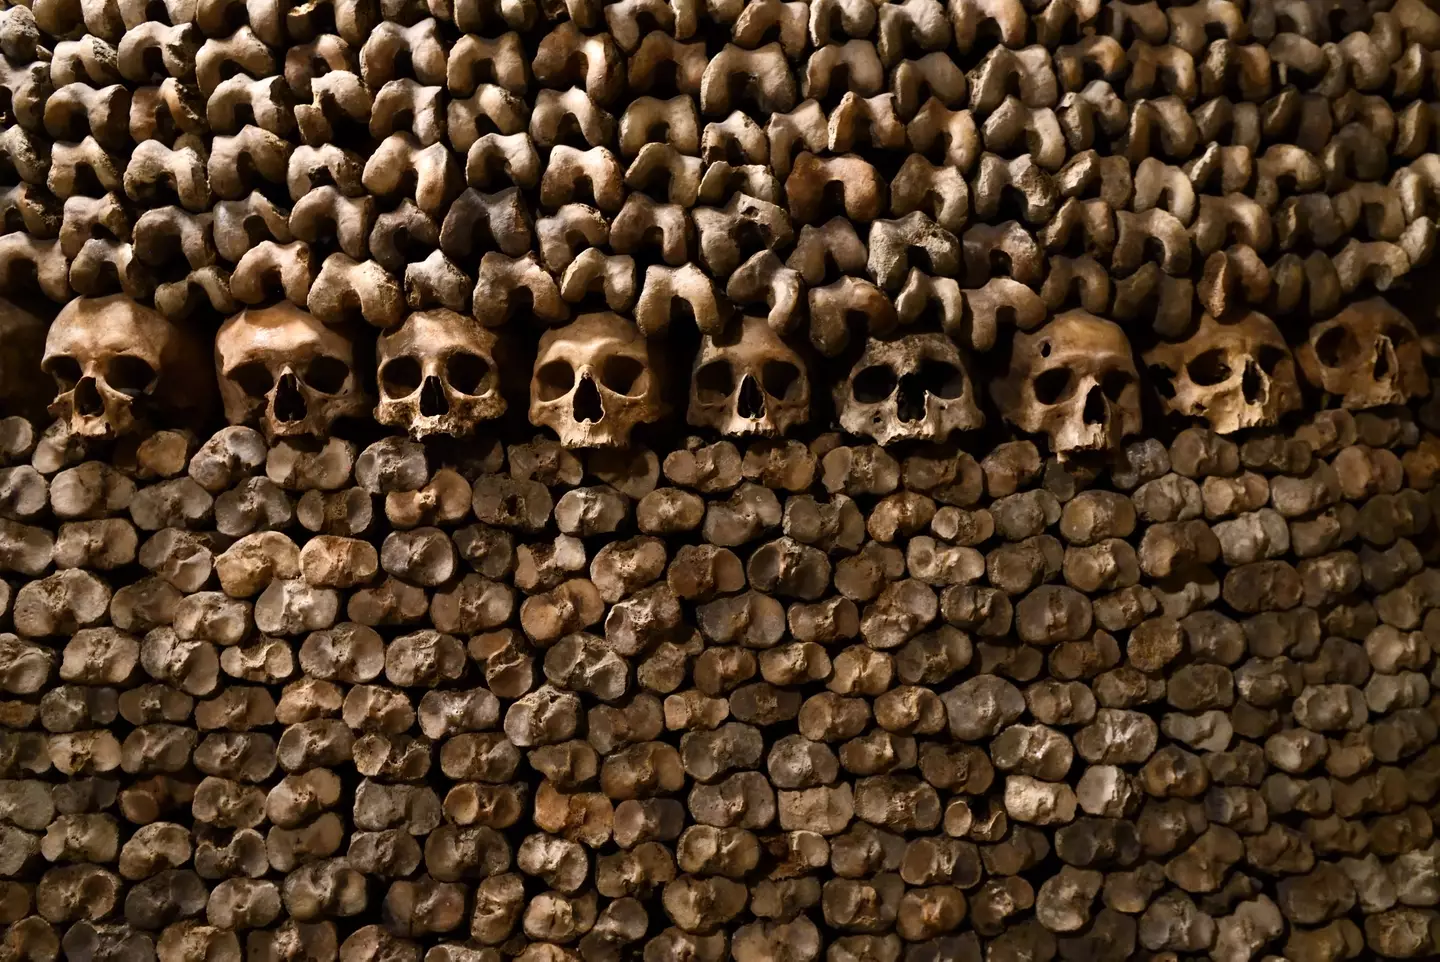 The catacombs are home to the bones of over six million people.